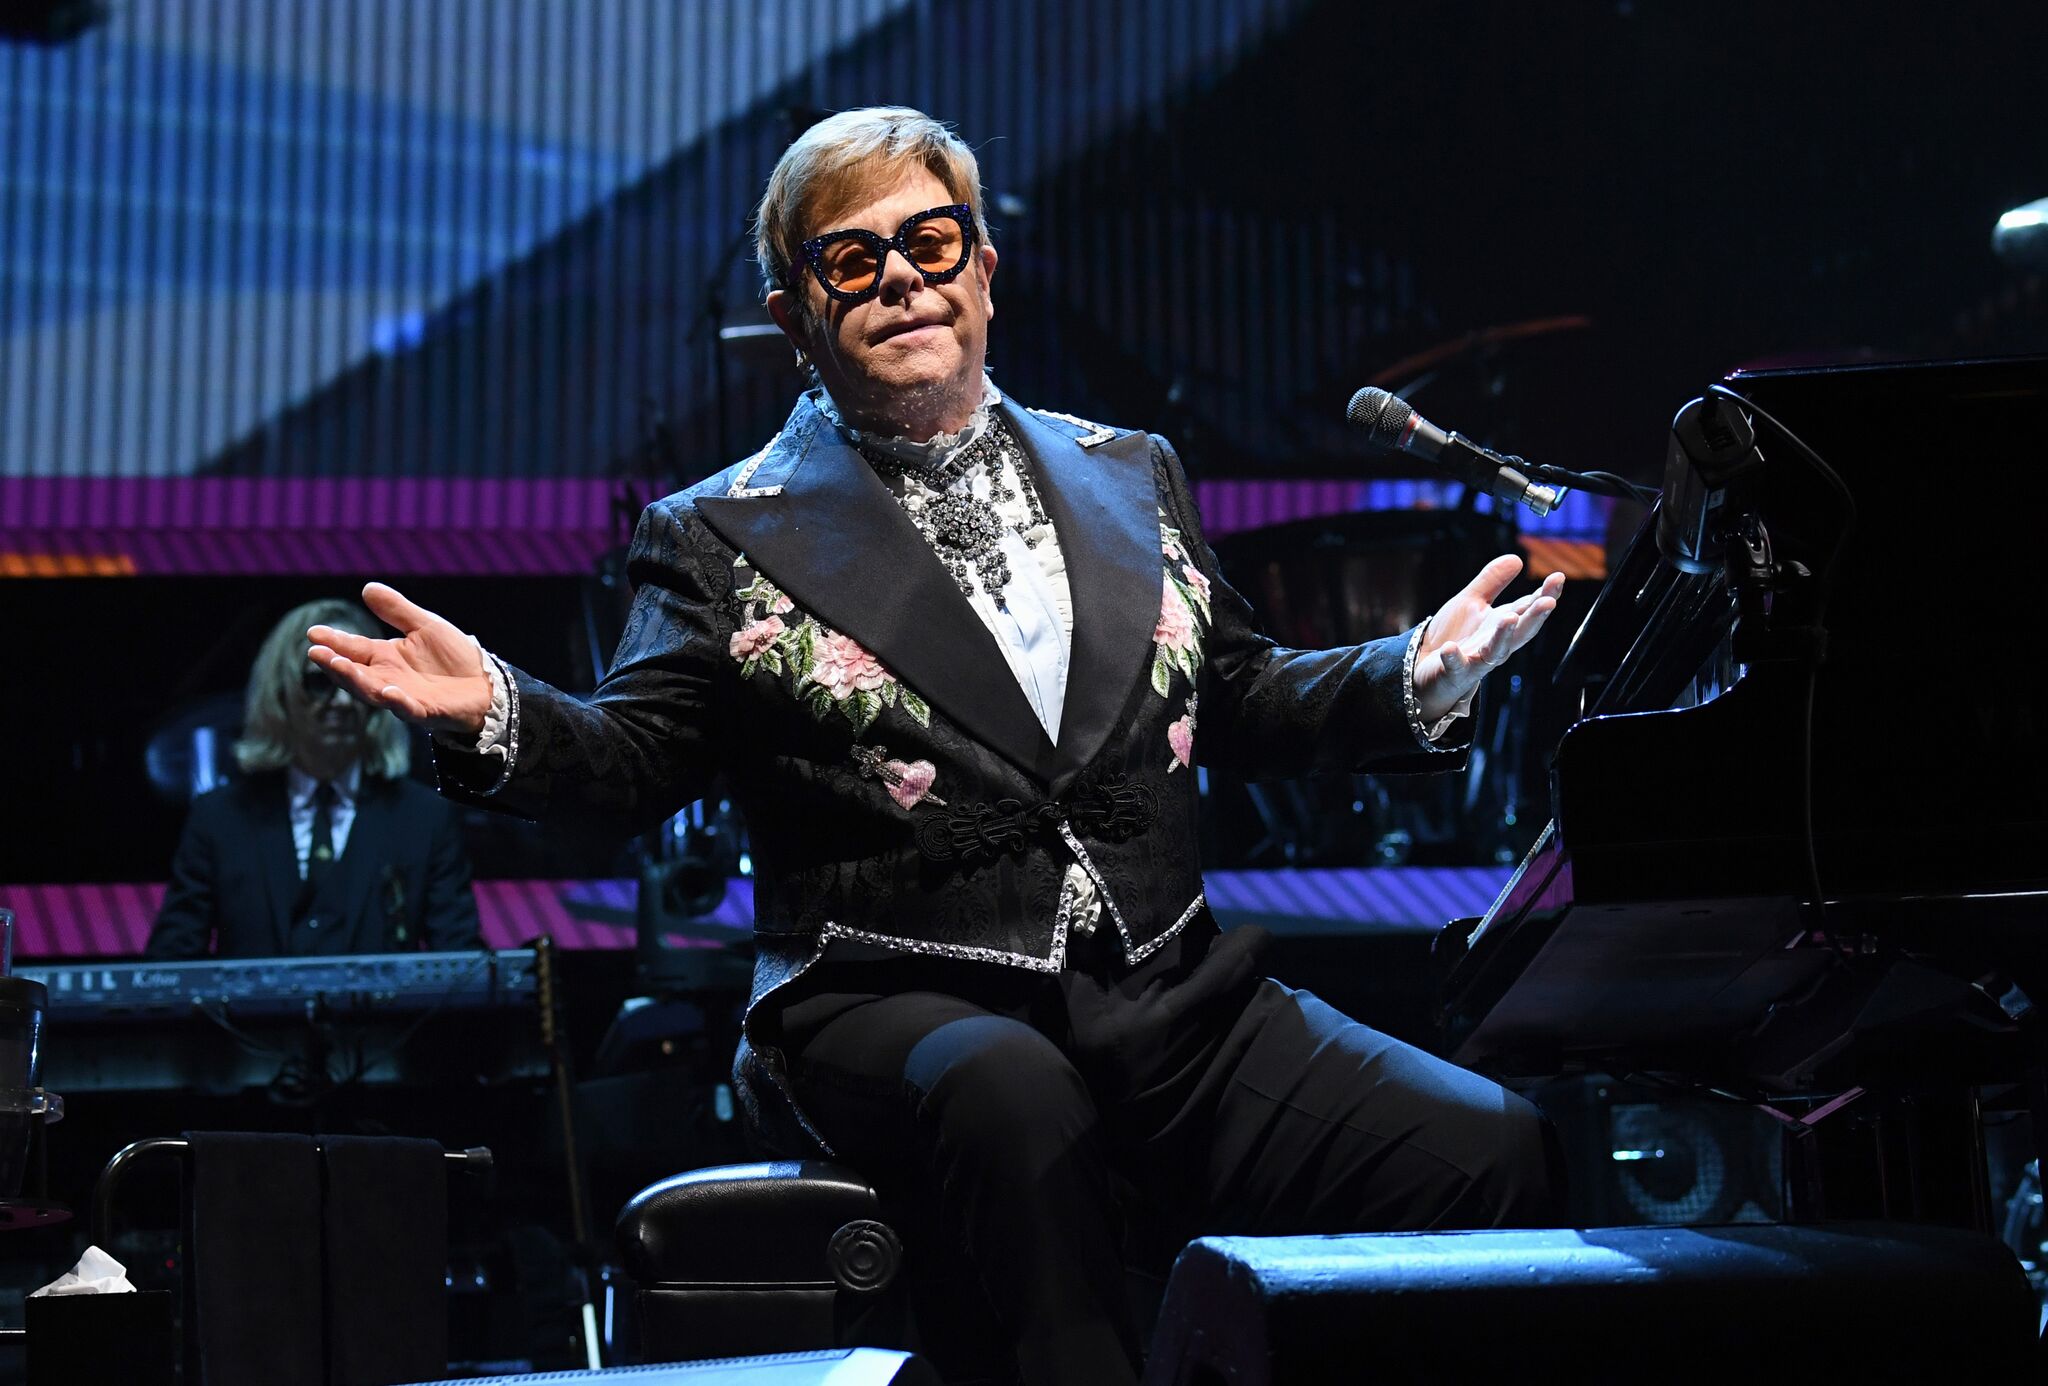 Elton John performs onstage during his "Farewell Yellow Brick Road" tour at Madison Square Garden on November 9, 2018 | Photo: Getty Images